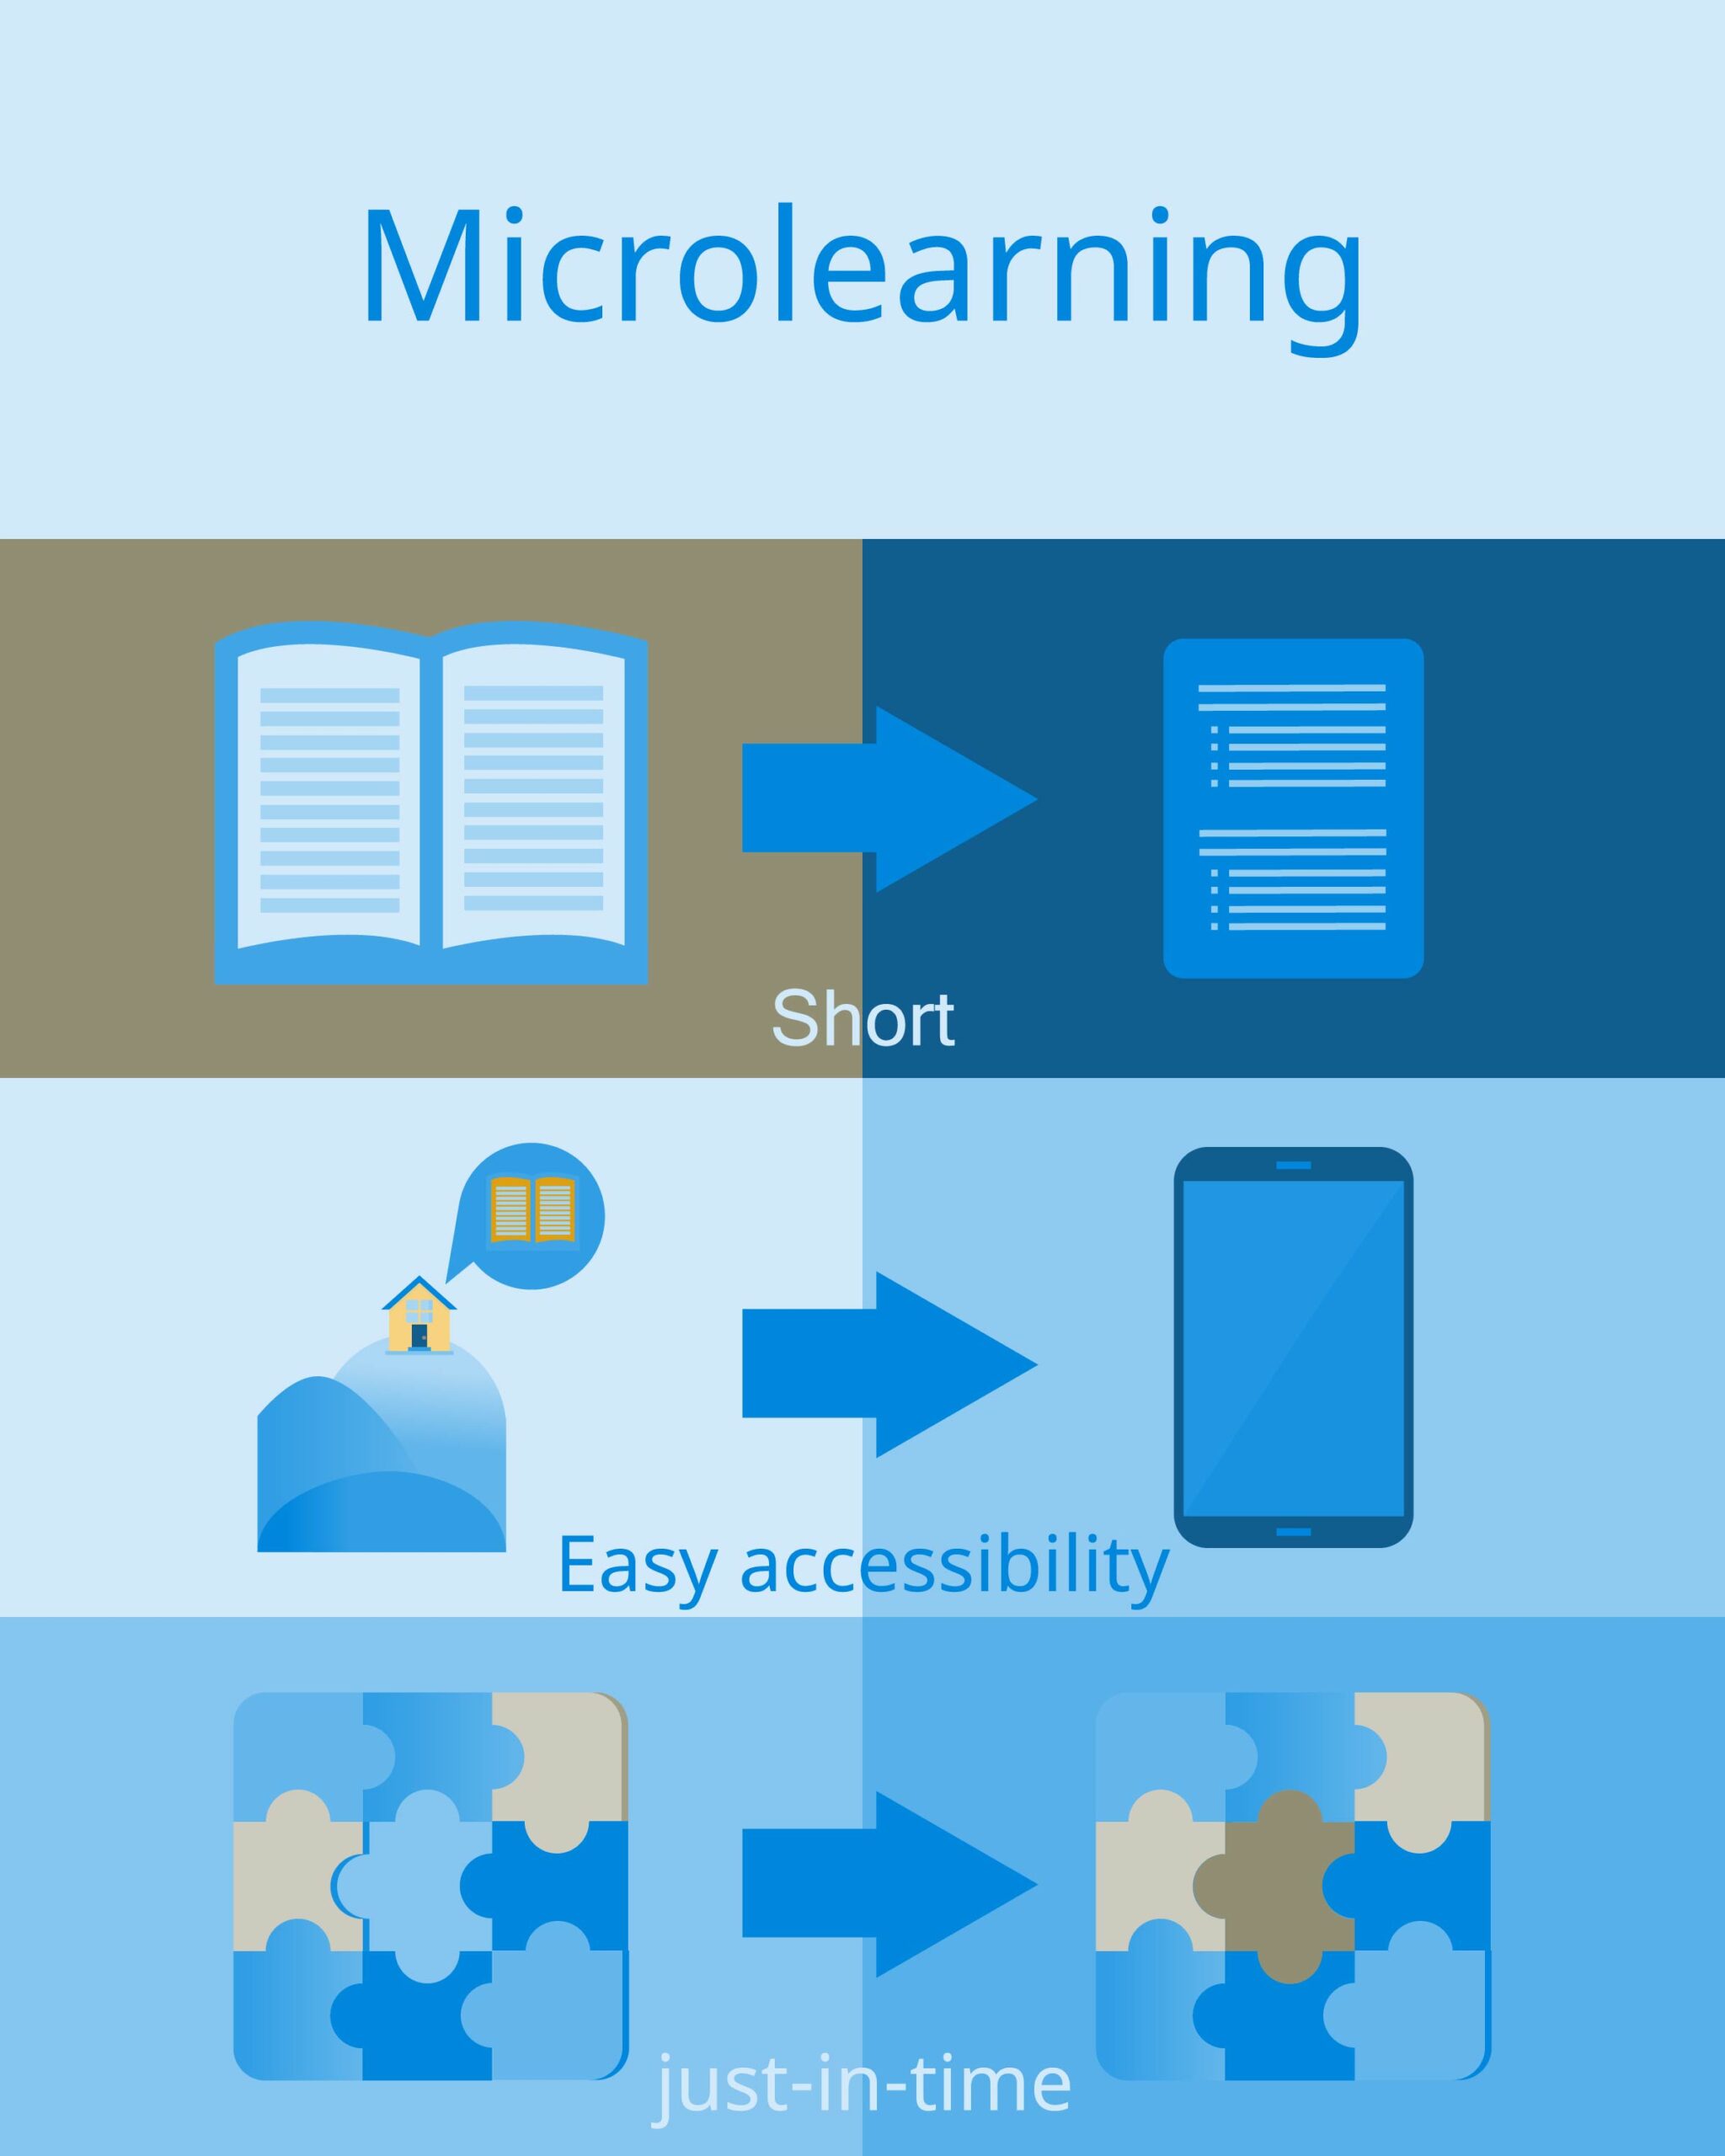 Microlearning benefits